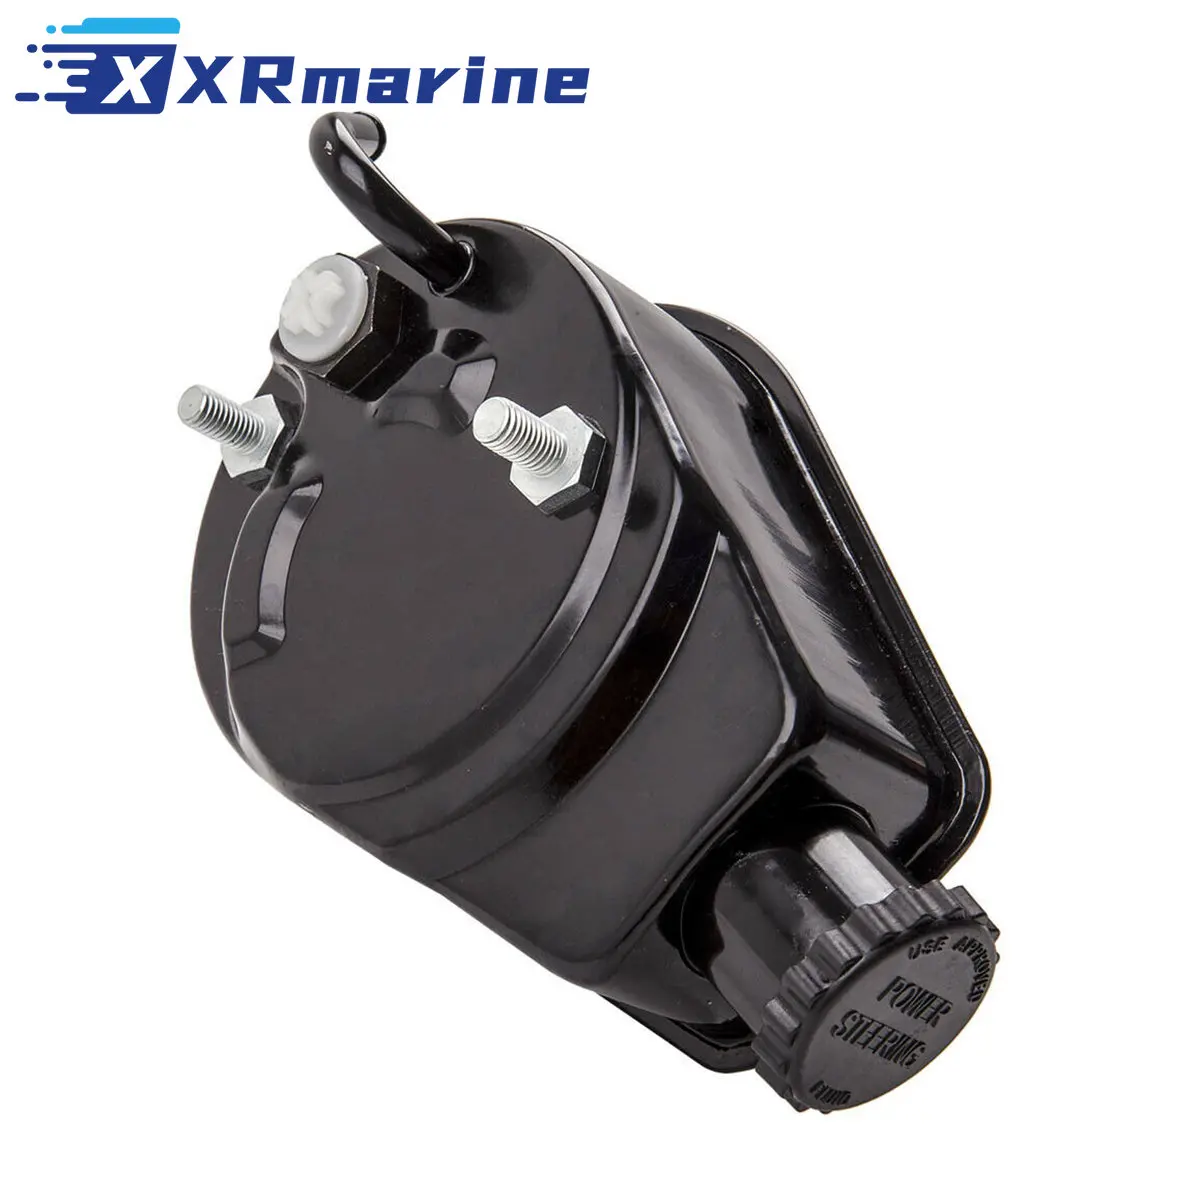 16792A39 Power Steering Pump for Mercruiser BRAVO ALPHA Stern Drive 90496A5 16792A33 16792A1 18-7508 furutech alpha ps 950 18 alpha occ conductor carbon fiber flagship fever upgrade us power cord ac power cable